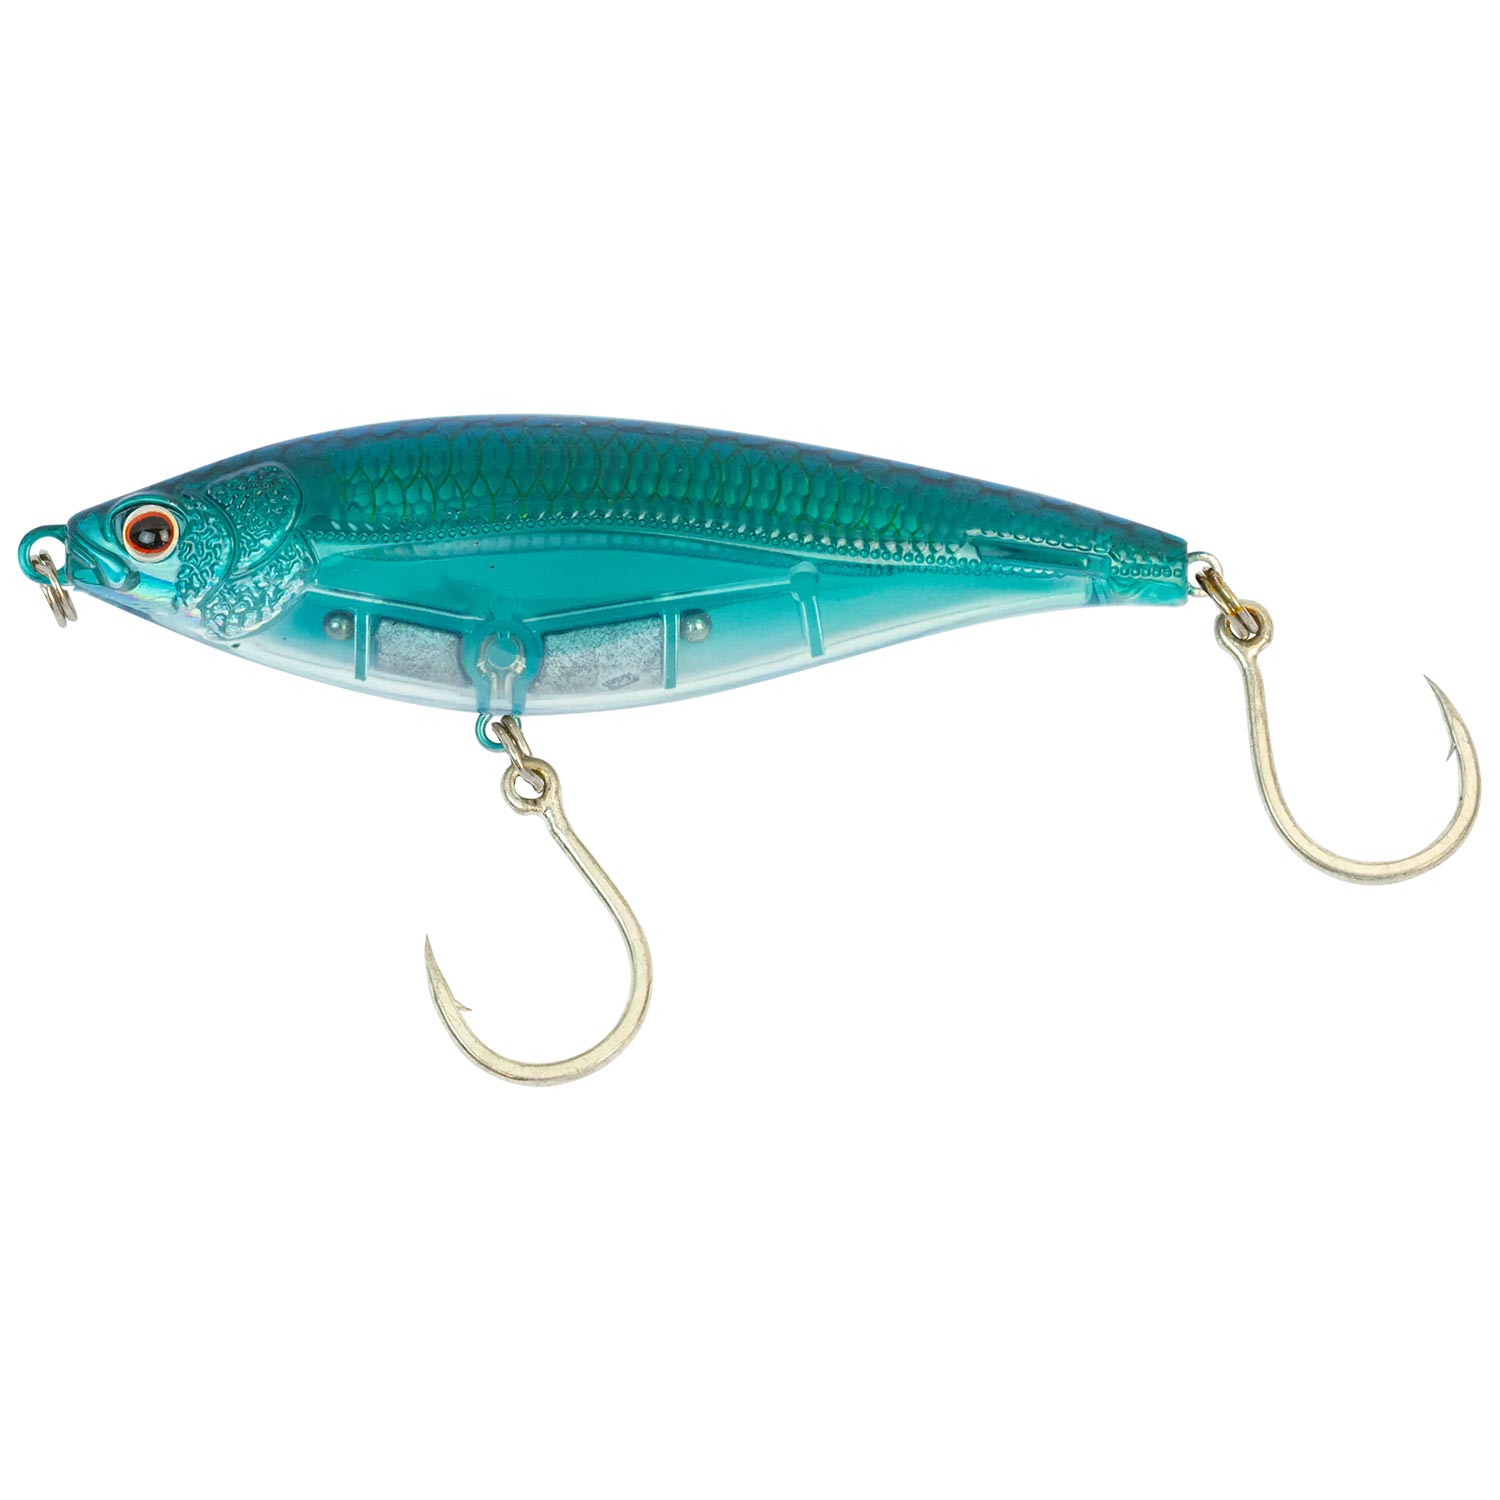 Nomad Design Madscad Autotune 90 Slow Sinking Lure - Natural Candy Pilchard